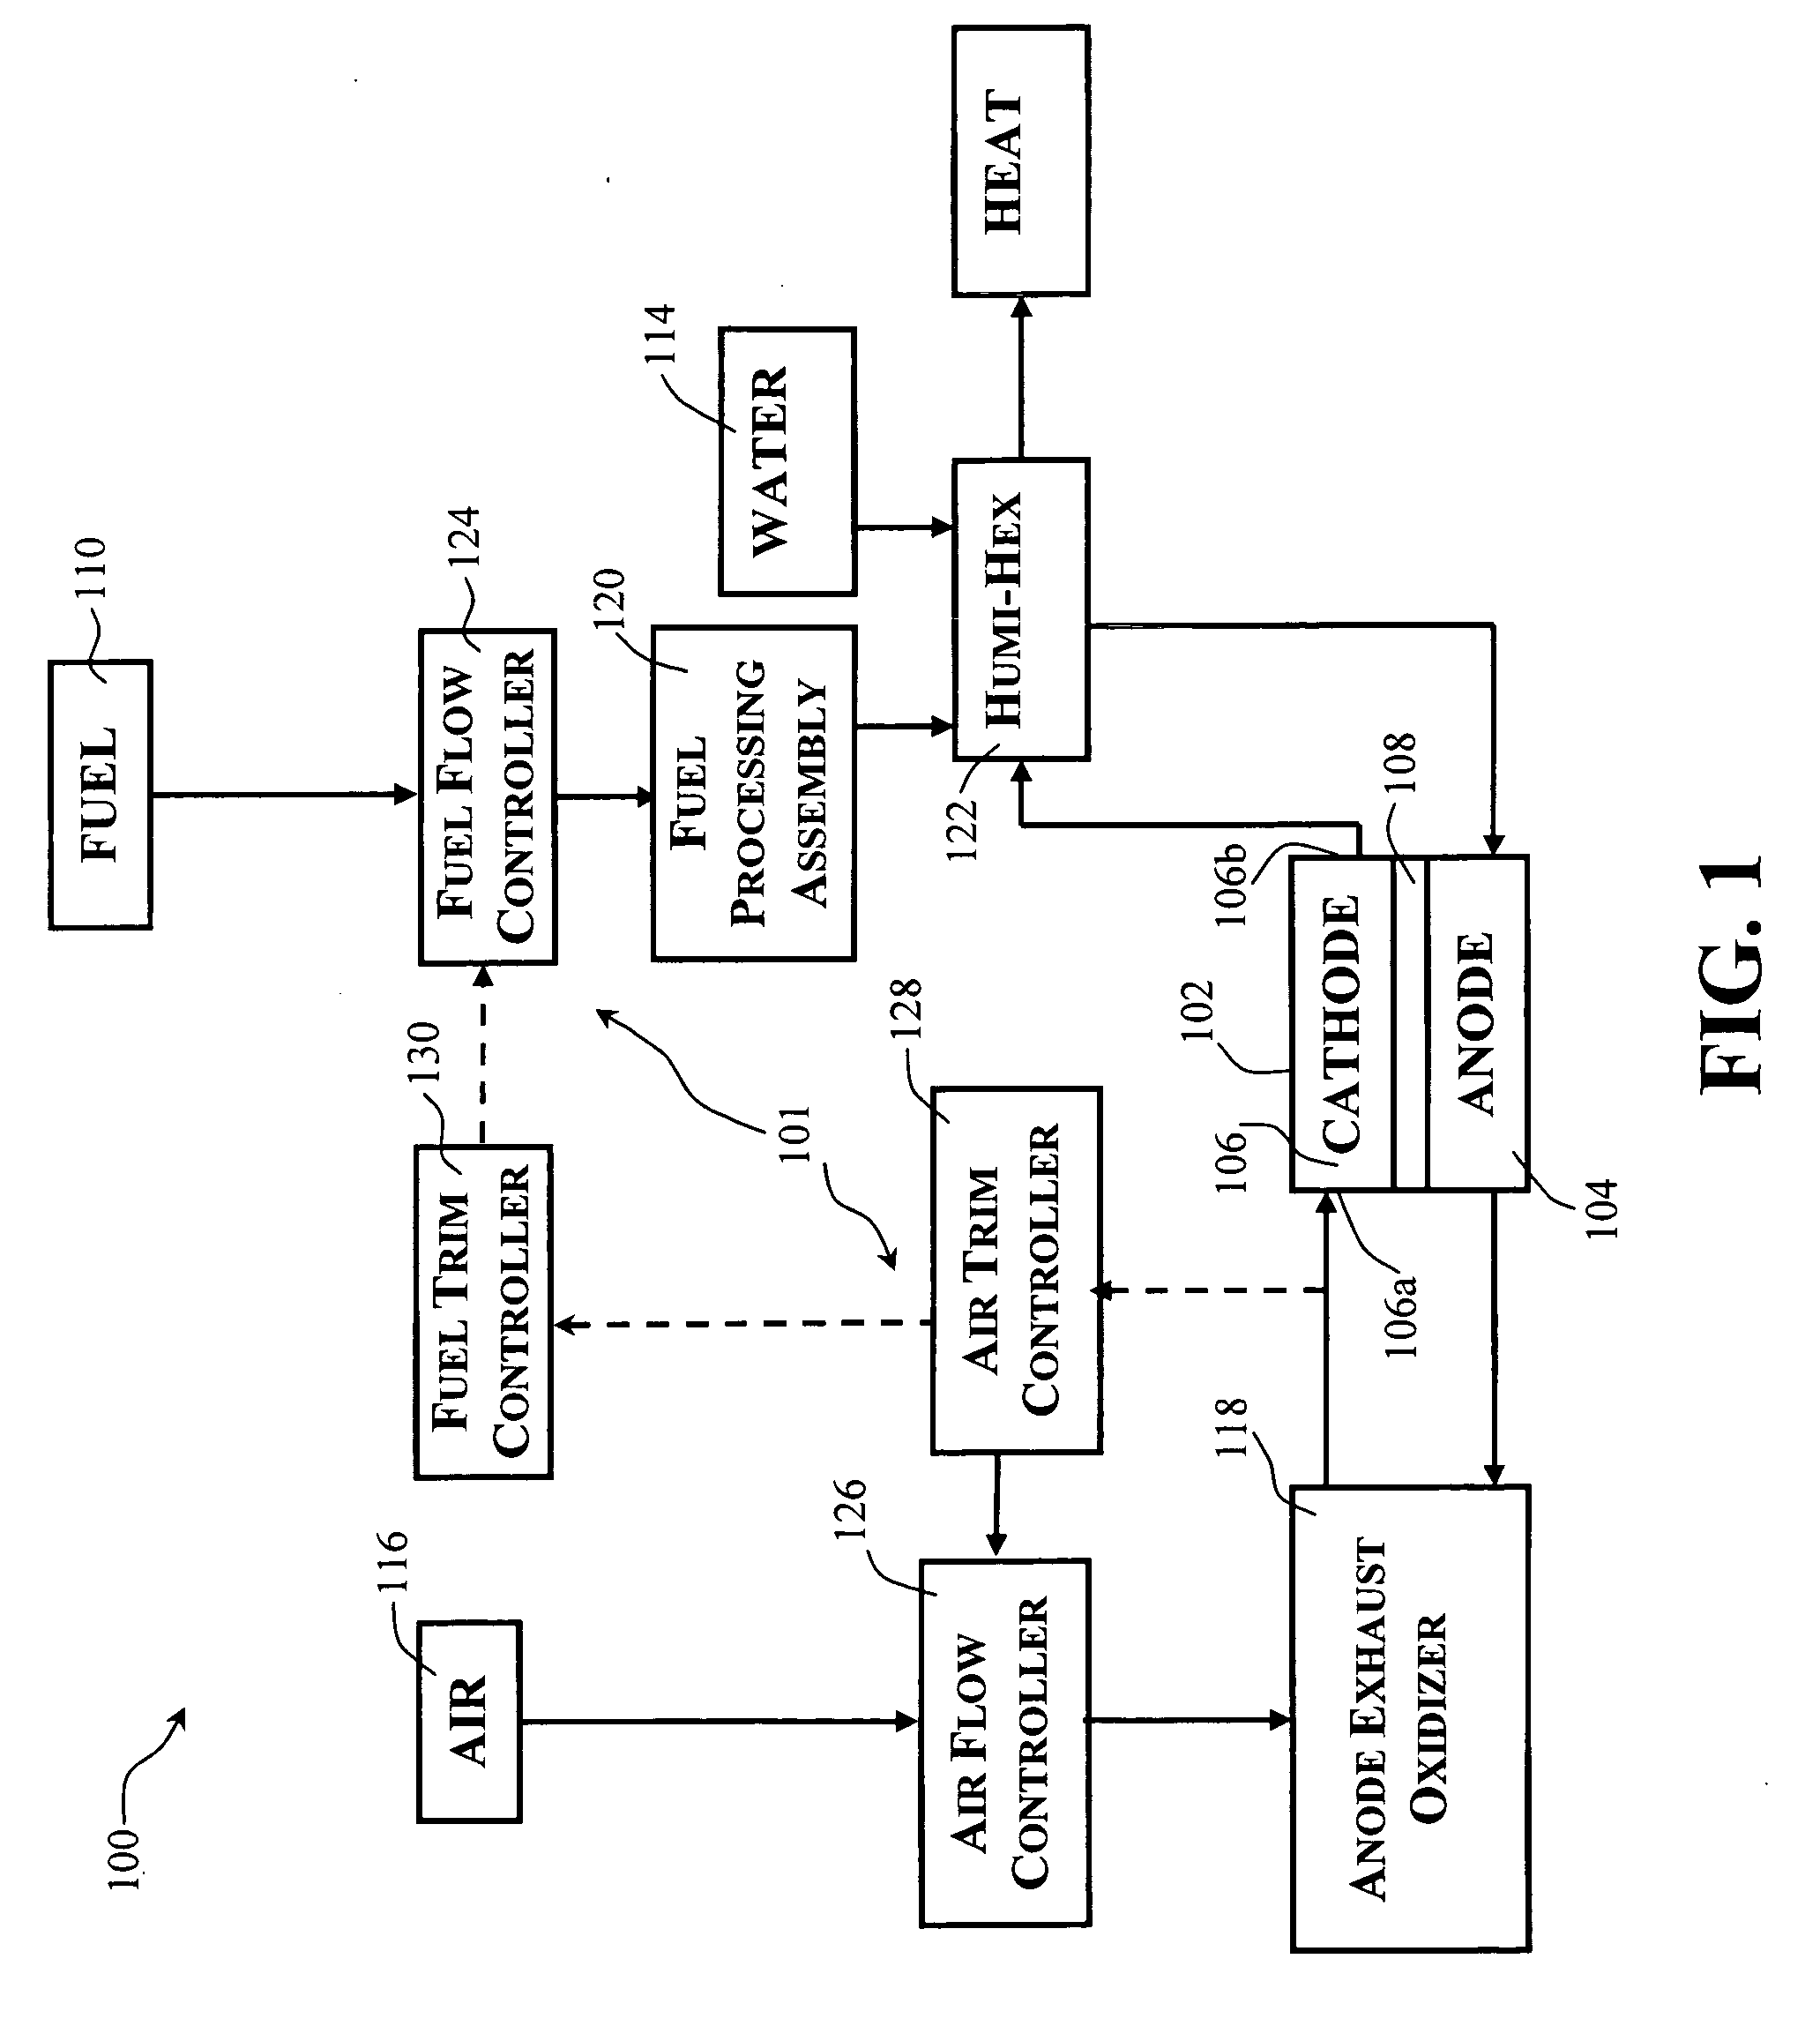 Gas flow control assembly for use with fuel cell systems operating on fuels with varying fuel composition